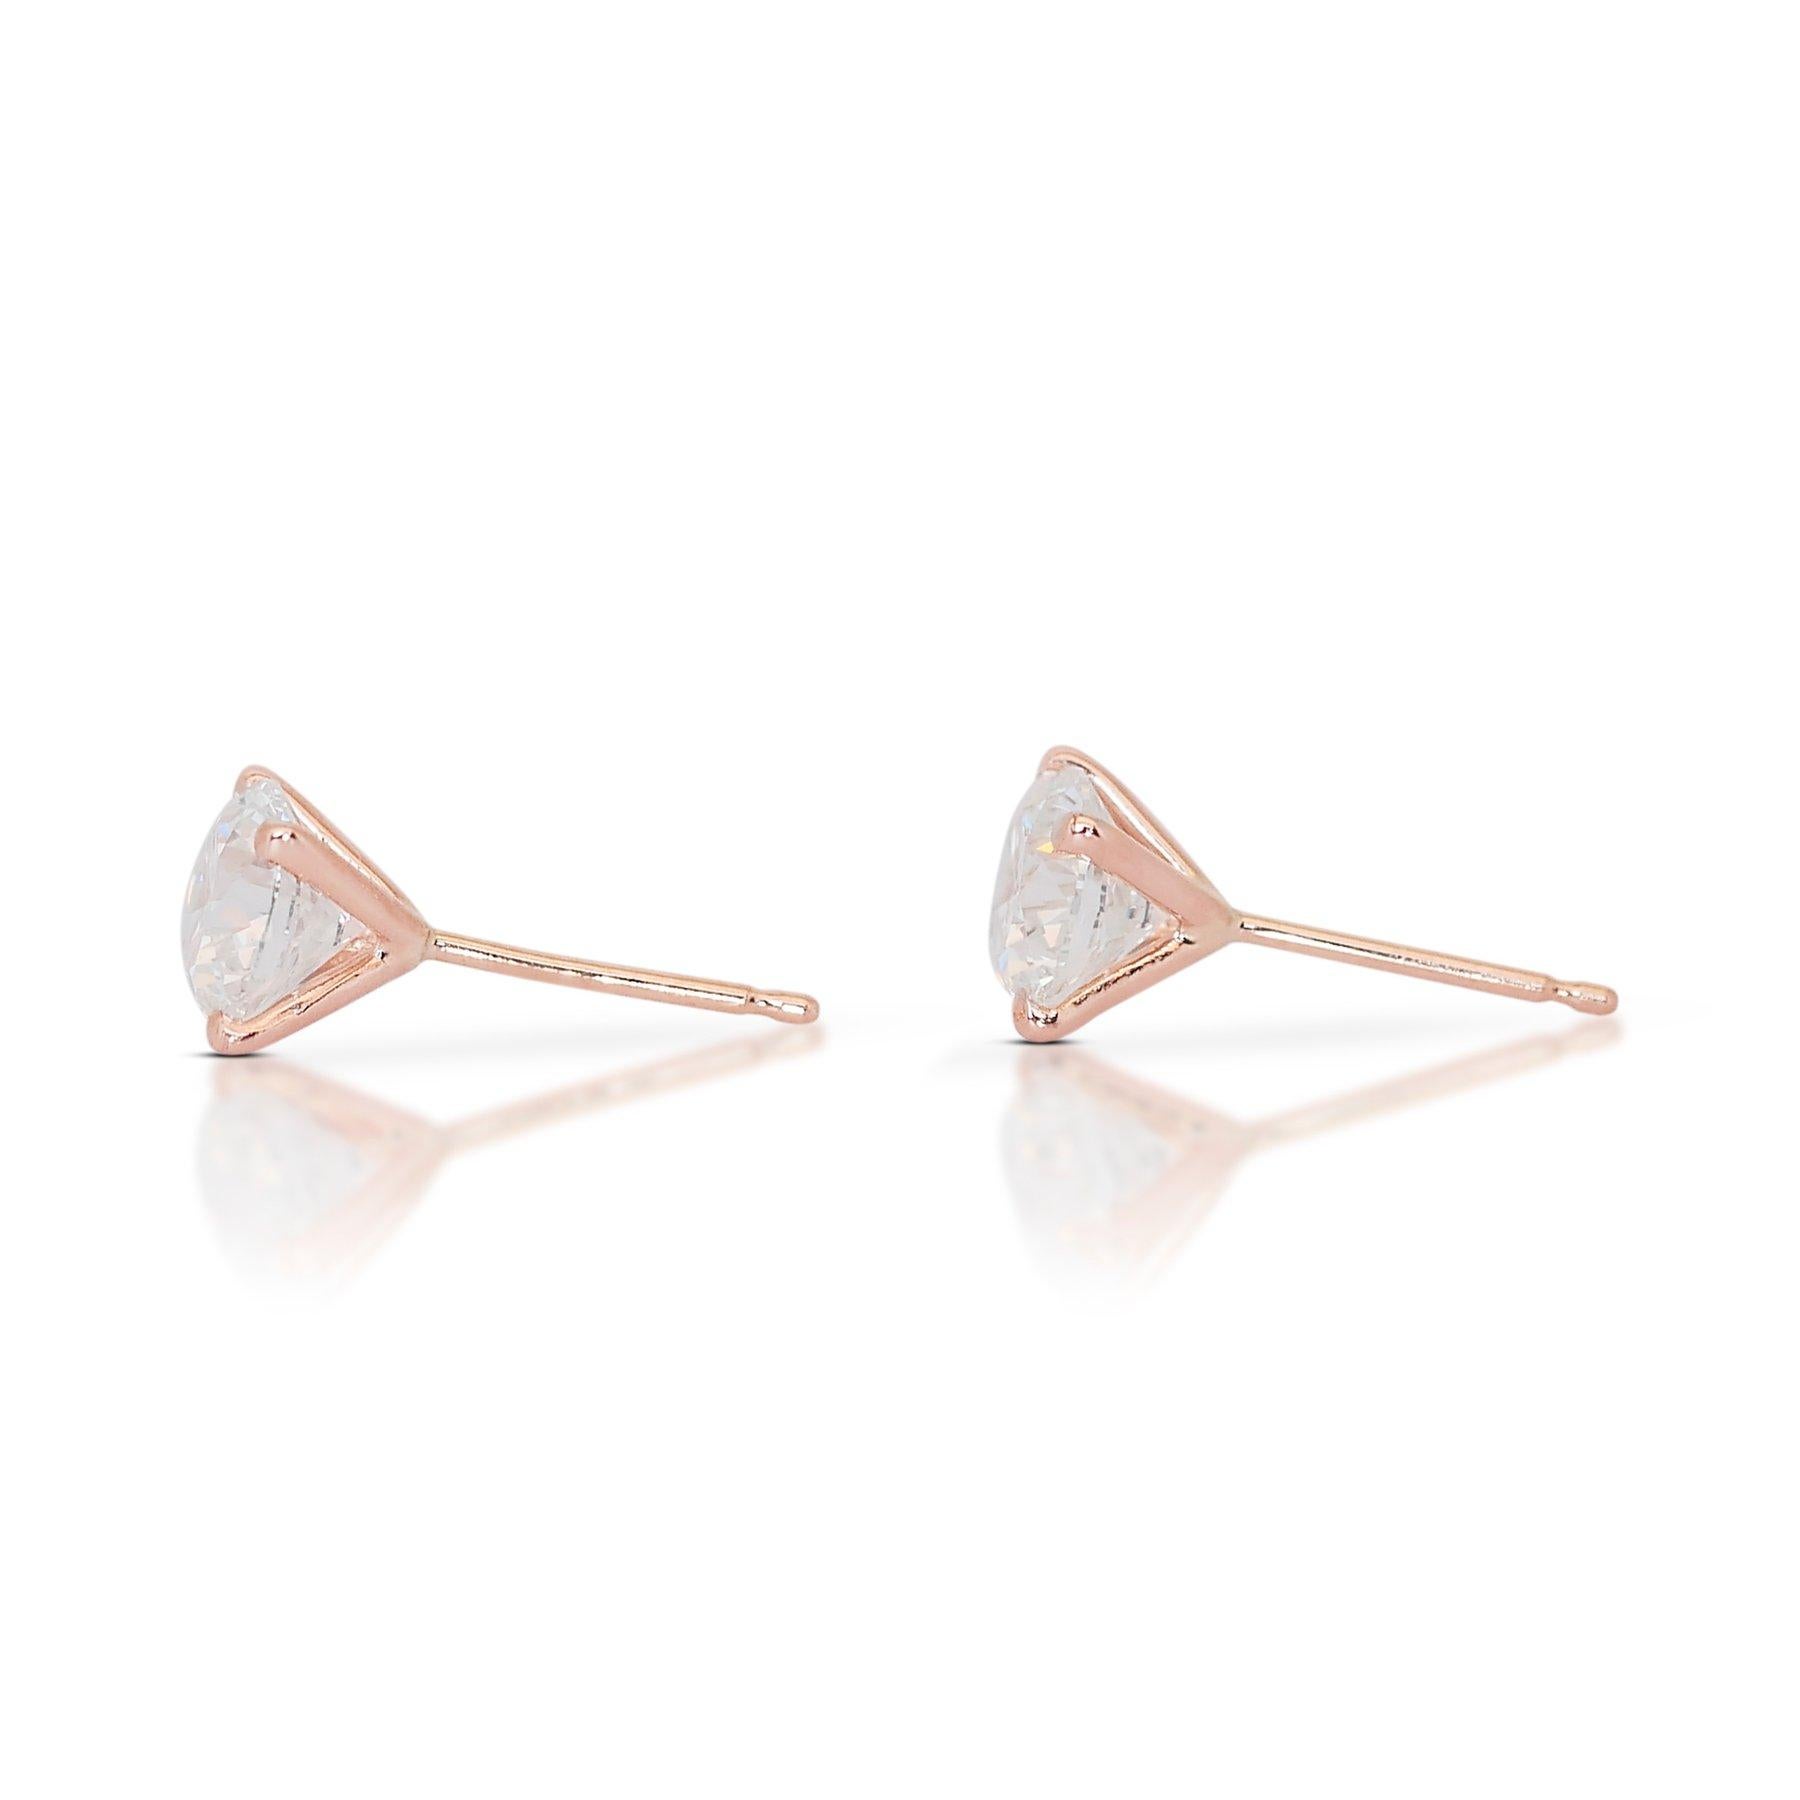 Magical 18K Rose Gold Diamond Stud Earrings with 1.80ct - GIA Certified For Sale 2